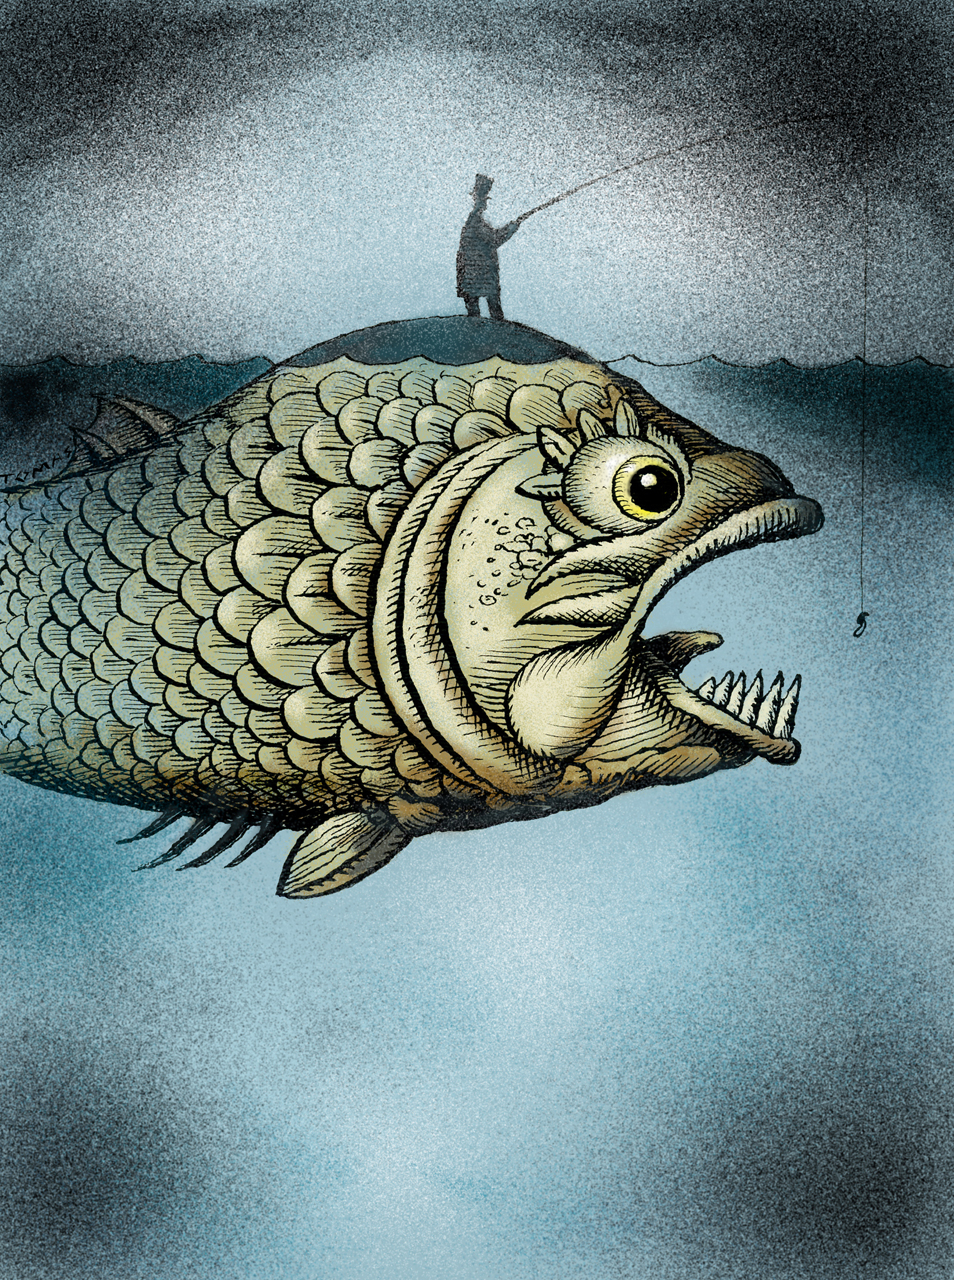 Campaign for Stormarknadspress  with a man fishing on a big fish